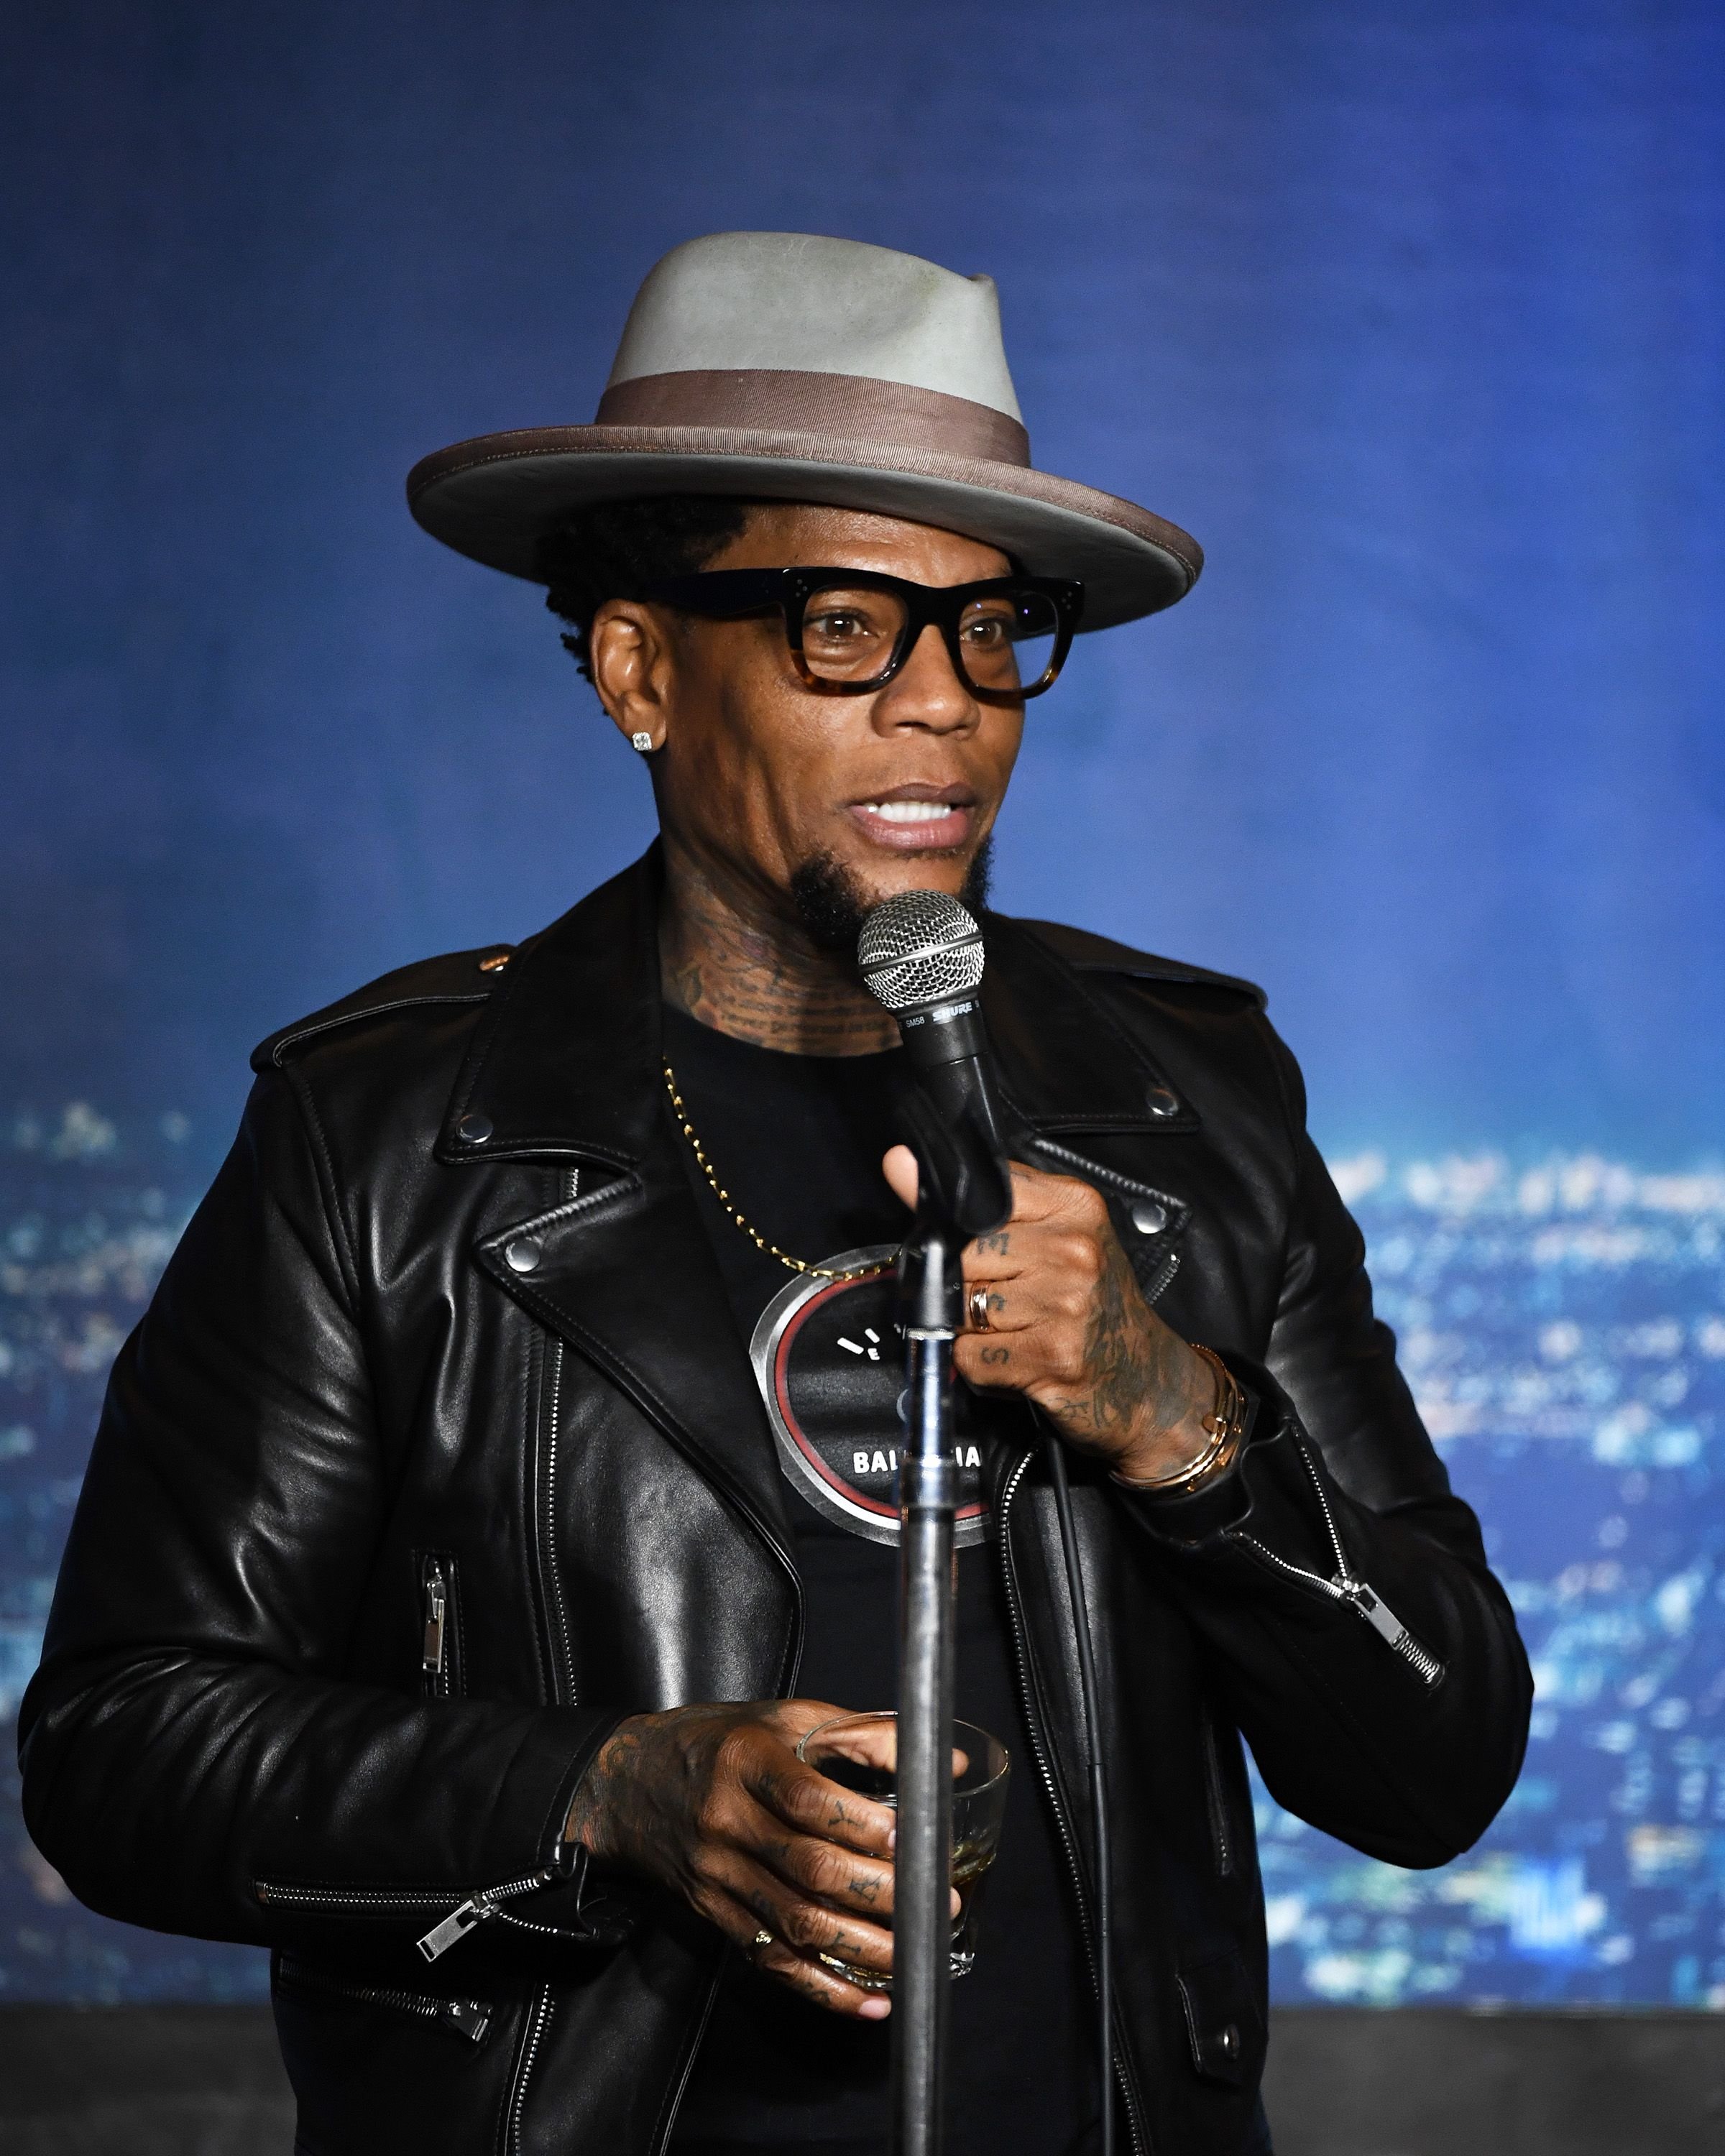 DL Hughley Once Shared That His Younger Daughter Was Afraid to Tell Him